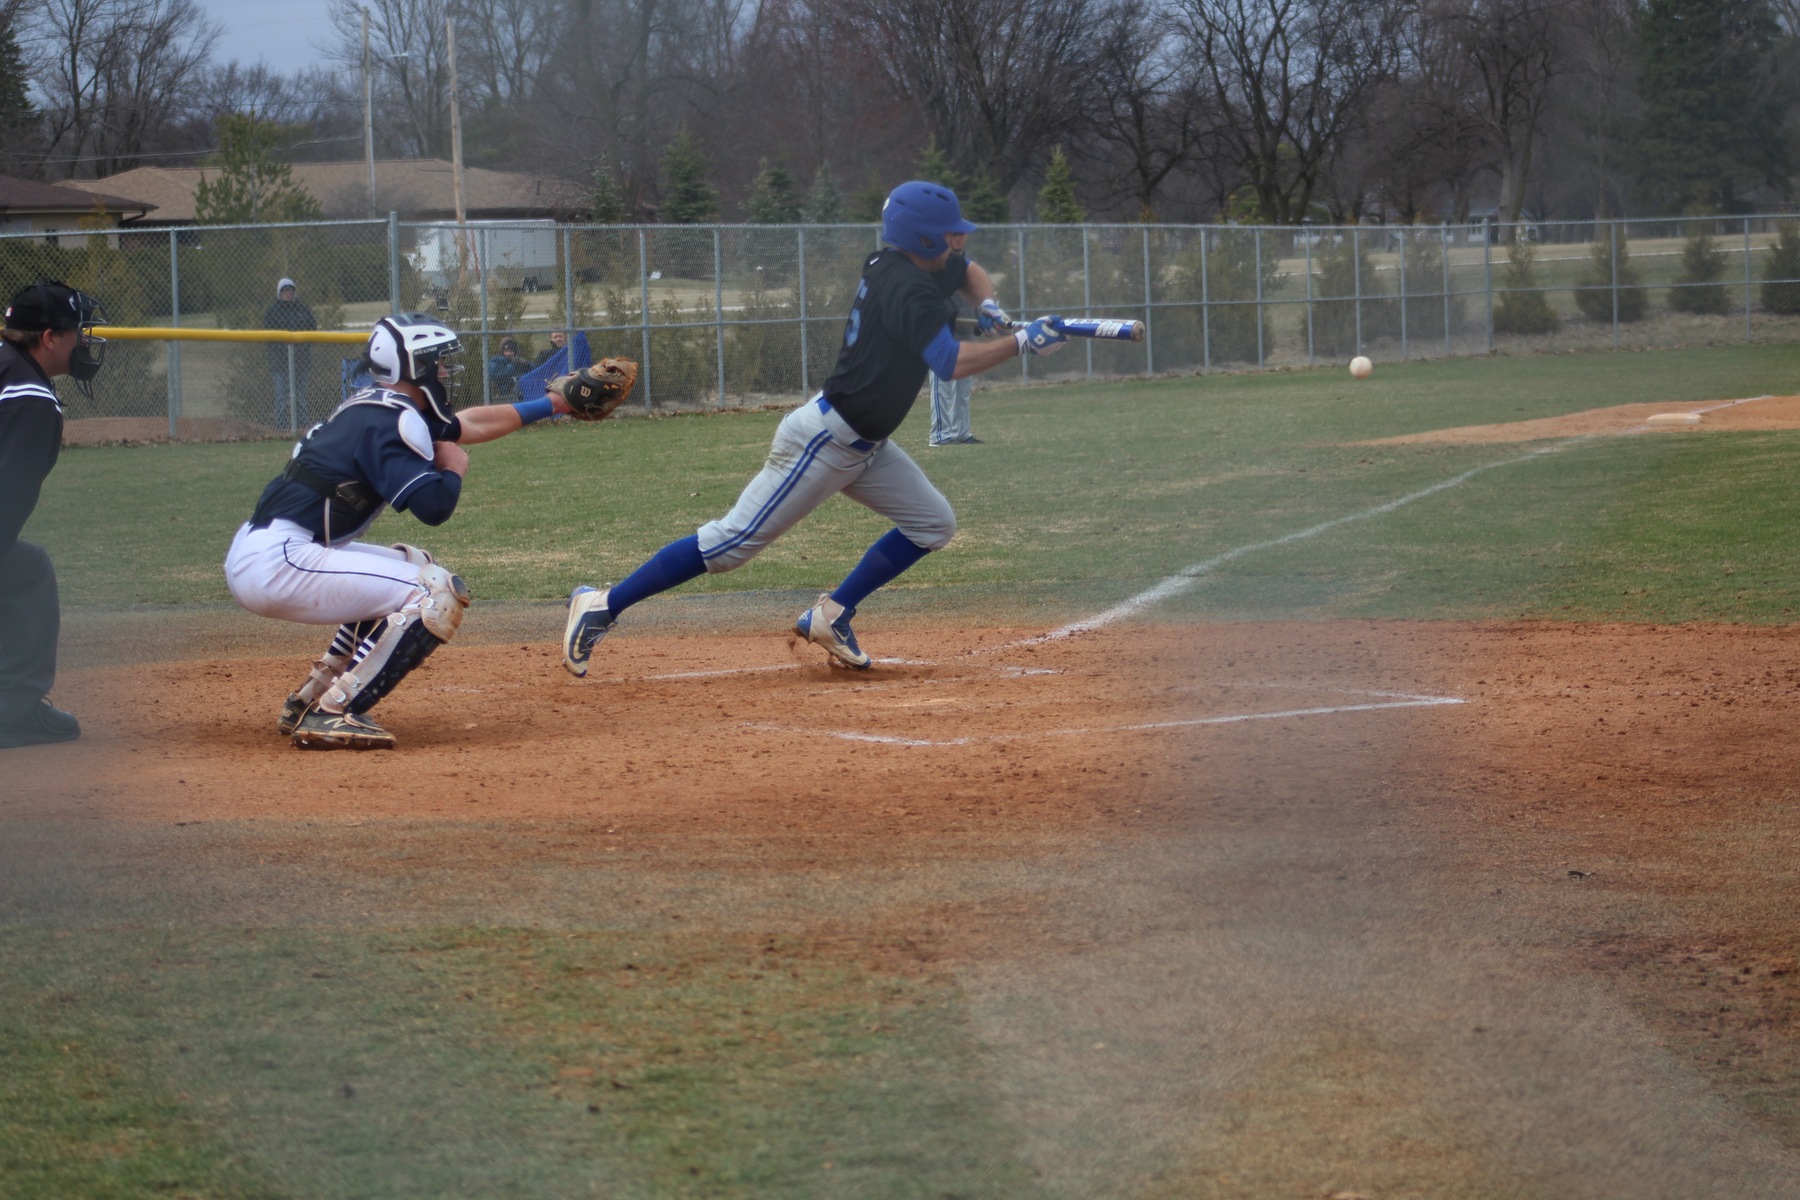 Aaron Kubal puts down a bunt during the second game of doubleheader on Monday.